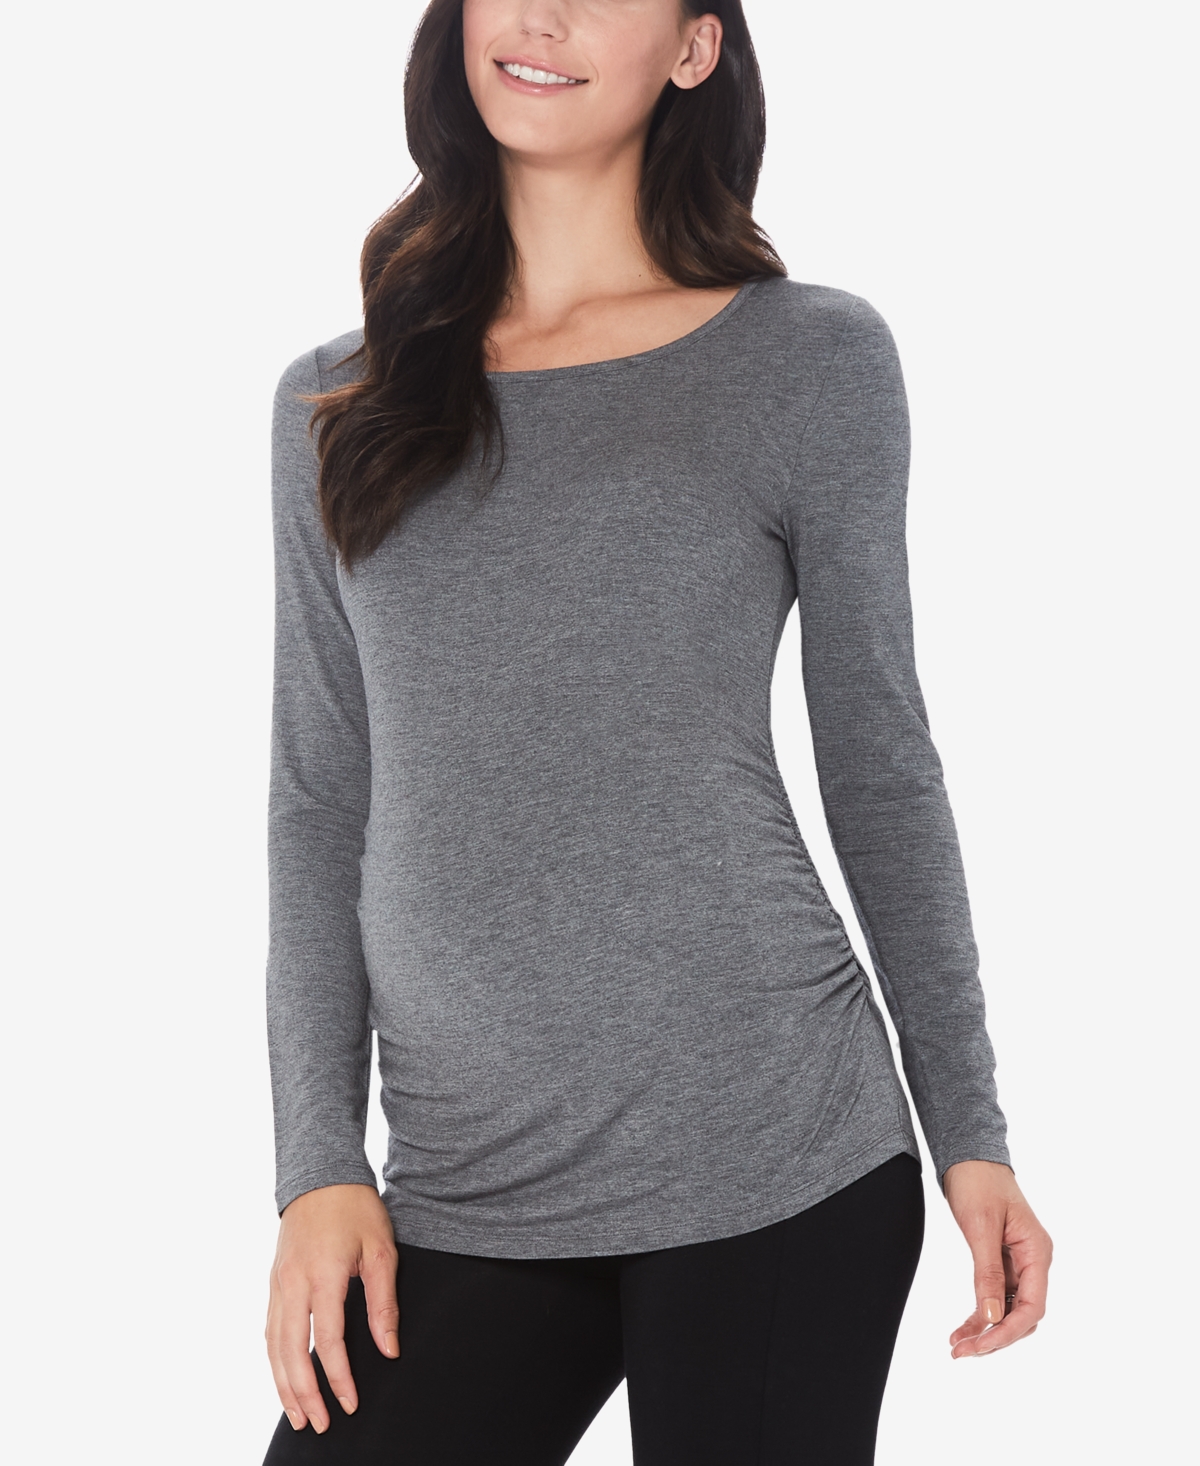 Cuddl Duds Women's Softwear With Stretch Maternity Long Sleeve Ballet Neck Top In Charcoal